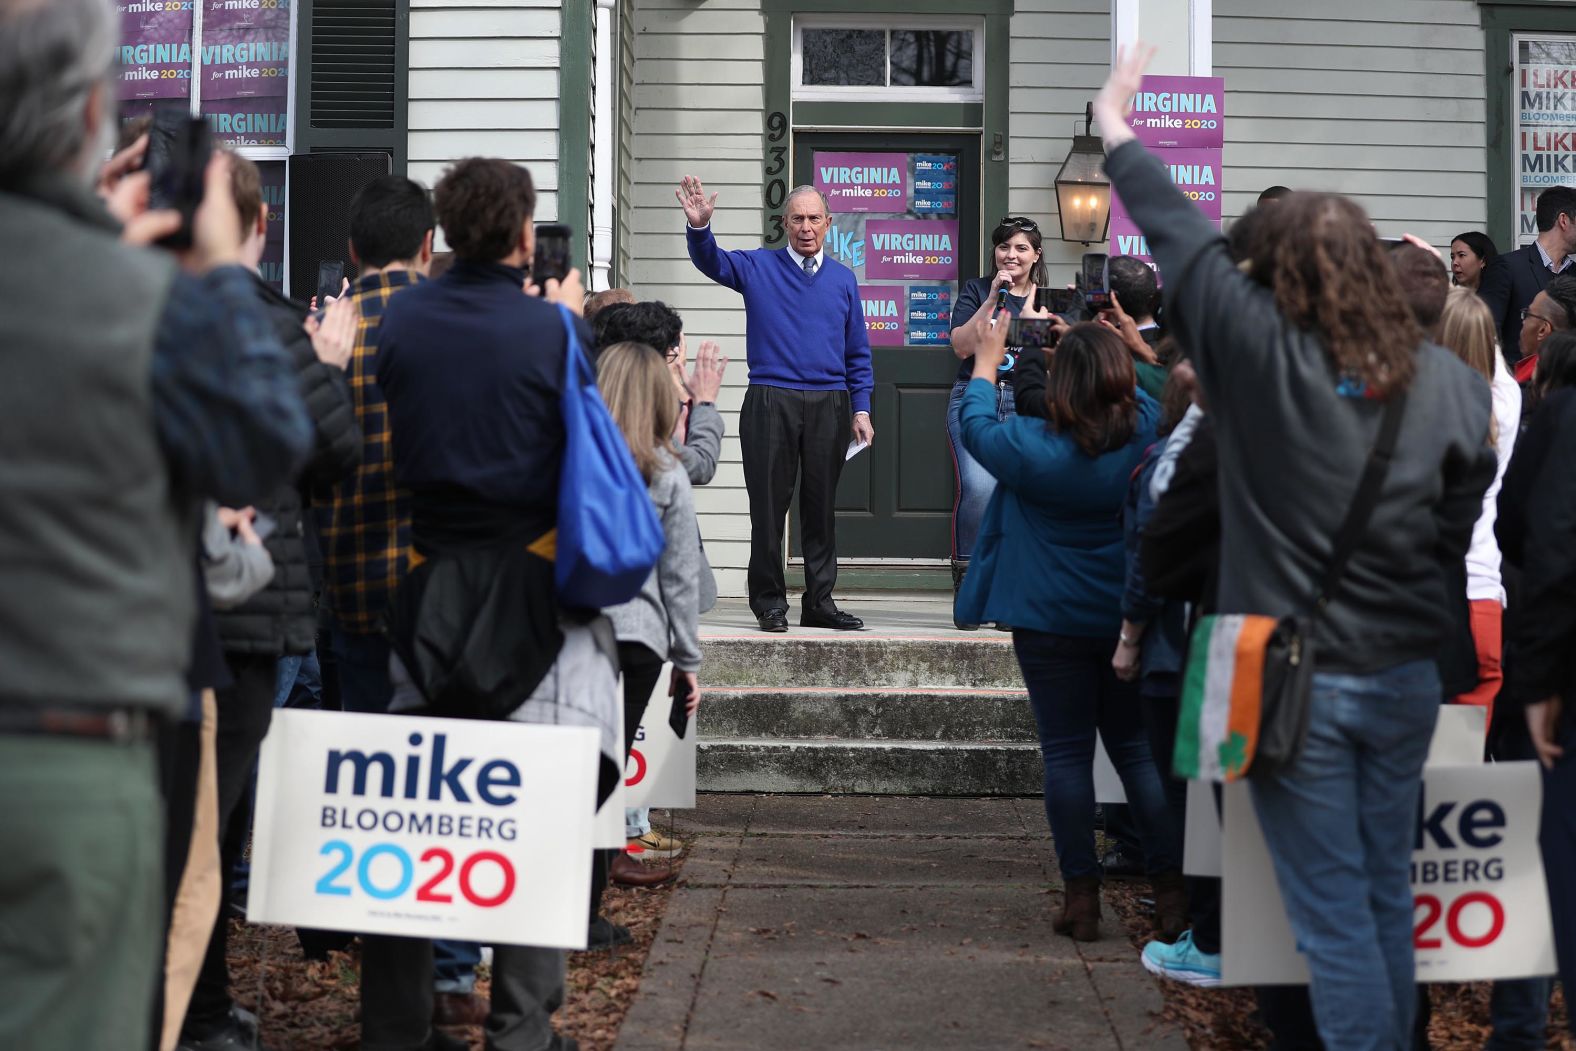 Bloomberg waves during a campaign stop in Manassas, Virginia, on Monday. The former New York City mayor didn't compete in the first four contests of this campaign season.